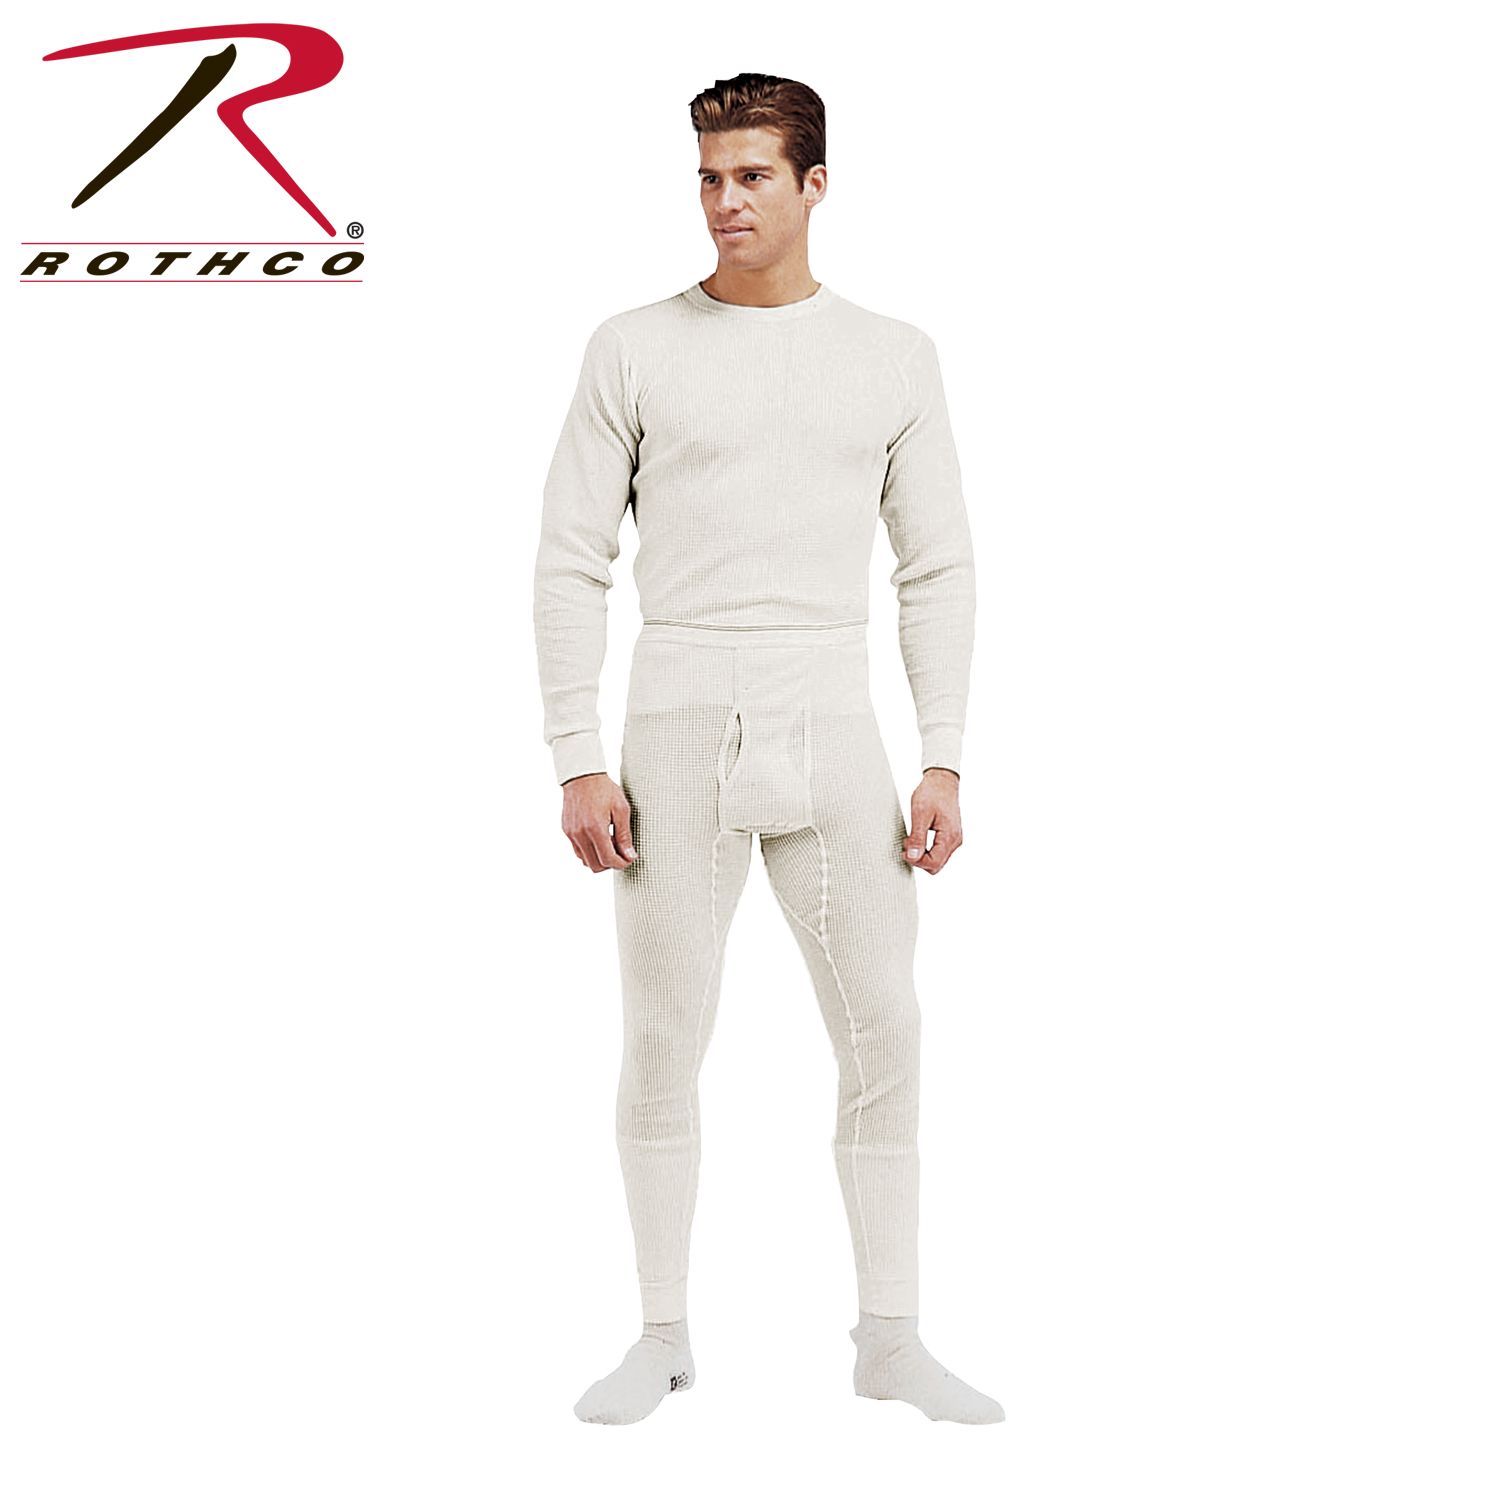 Buy 6454_Rothco Thermal Knit Underwear Bottoms - Rothco Online at